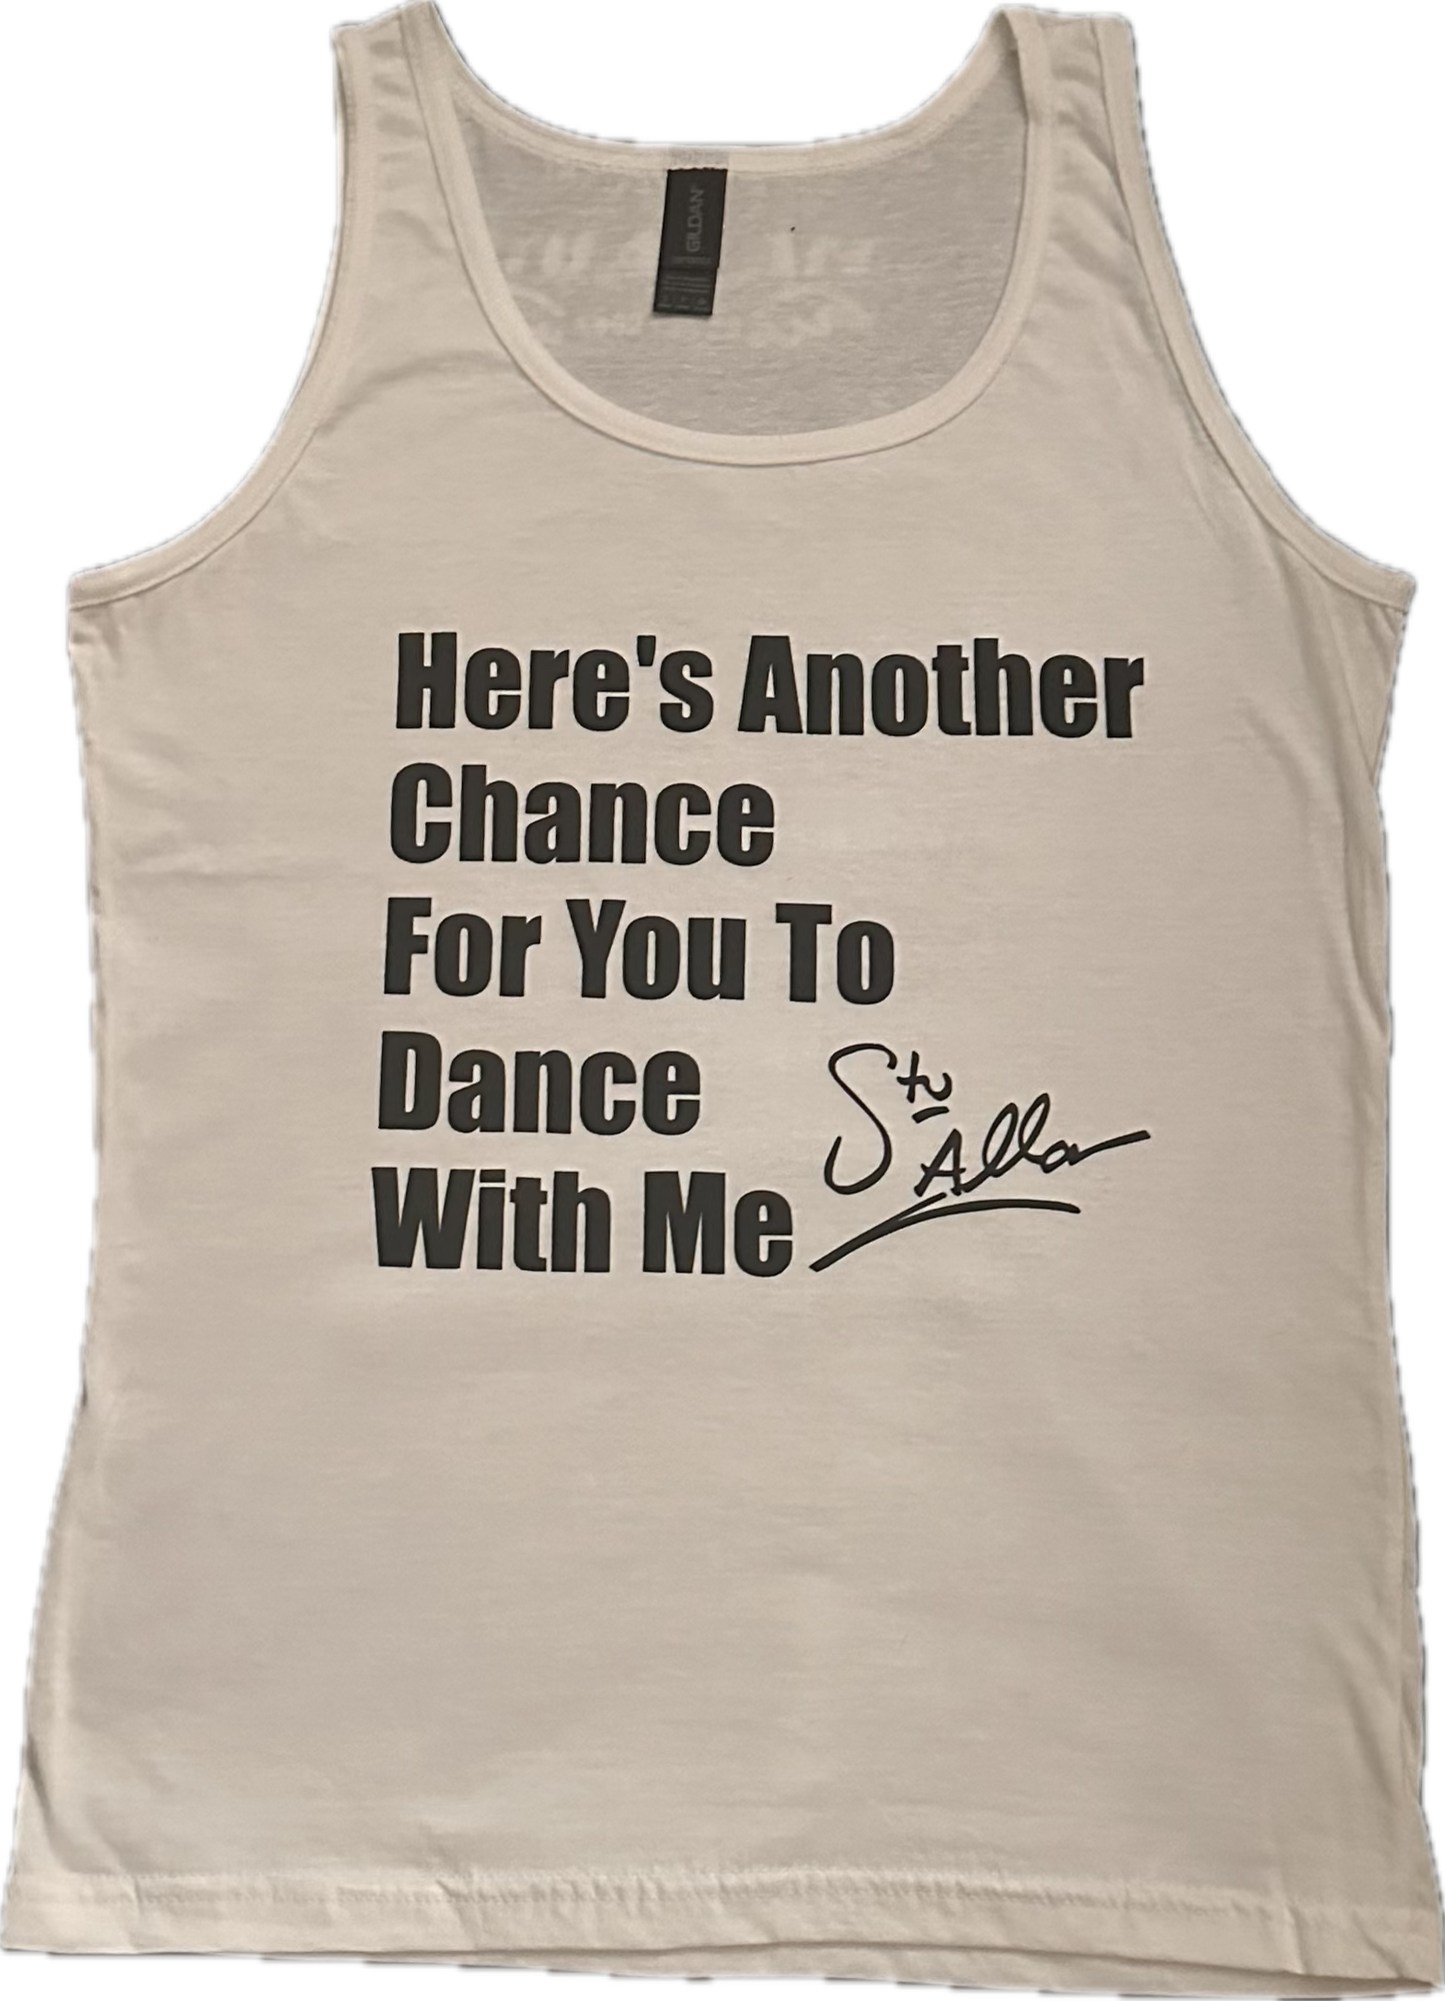 Women's Gildan Soft Style Vest White “Here’s Another Chance For You to Dance With Me” Signature